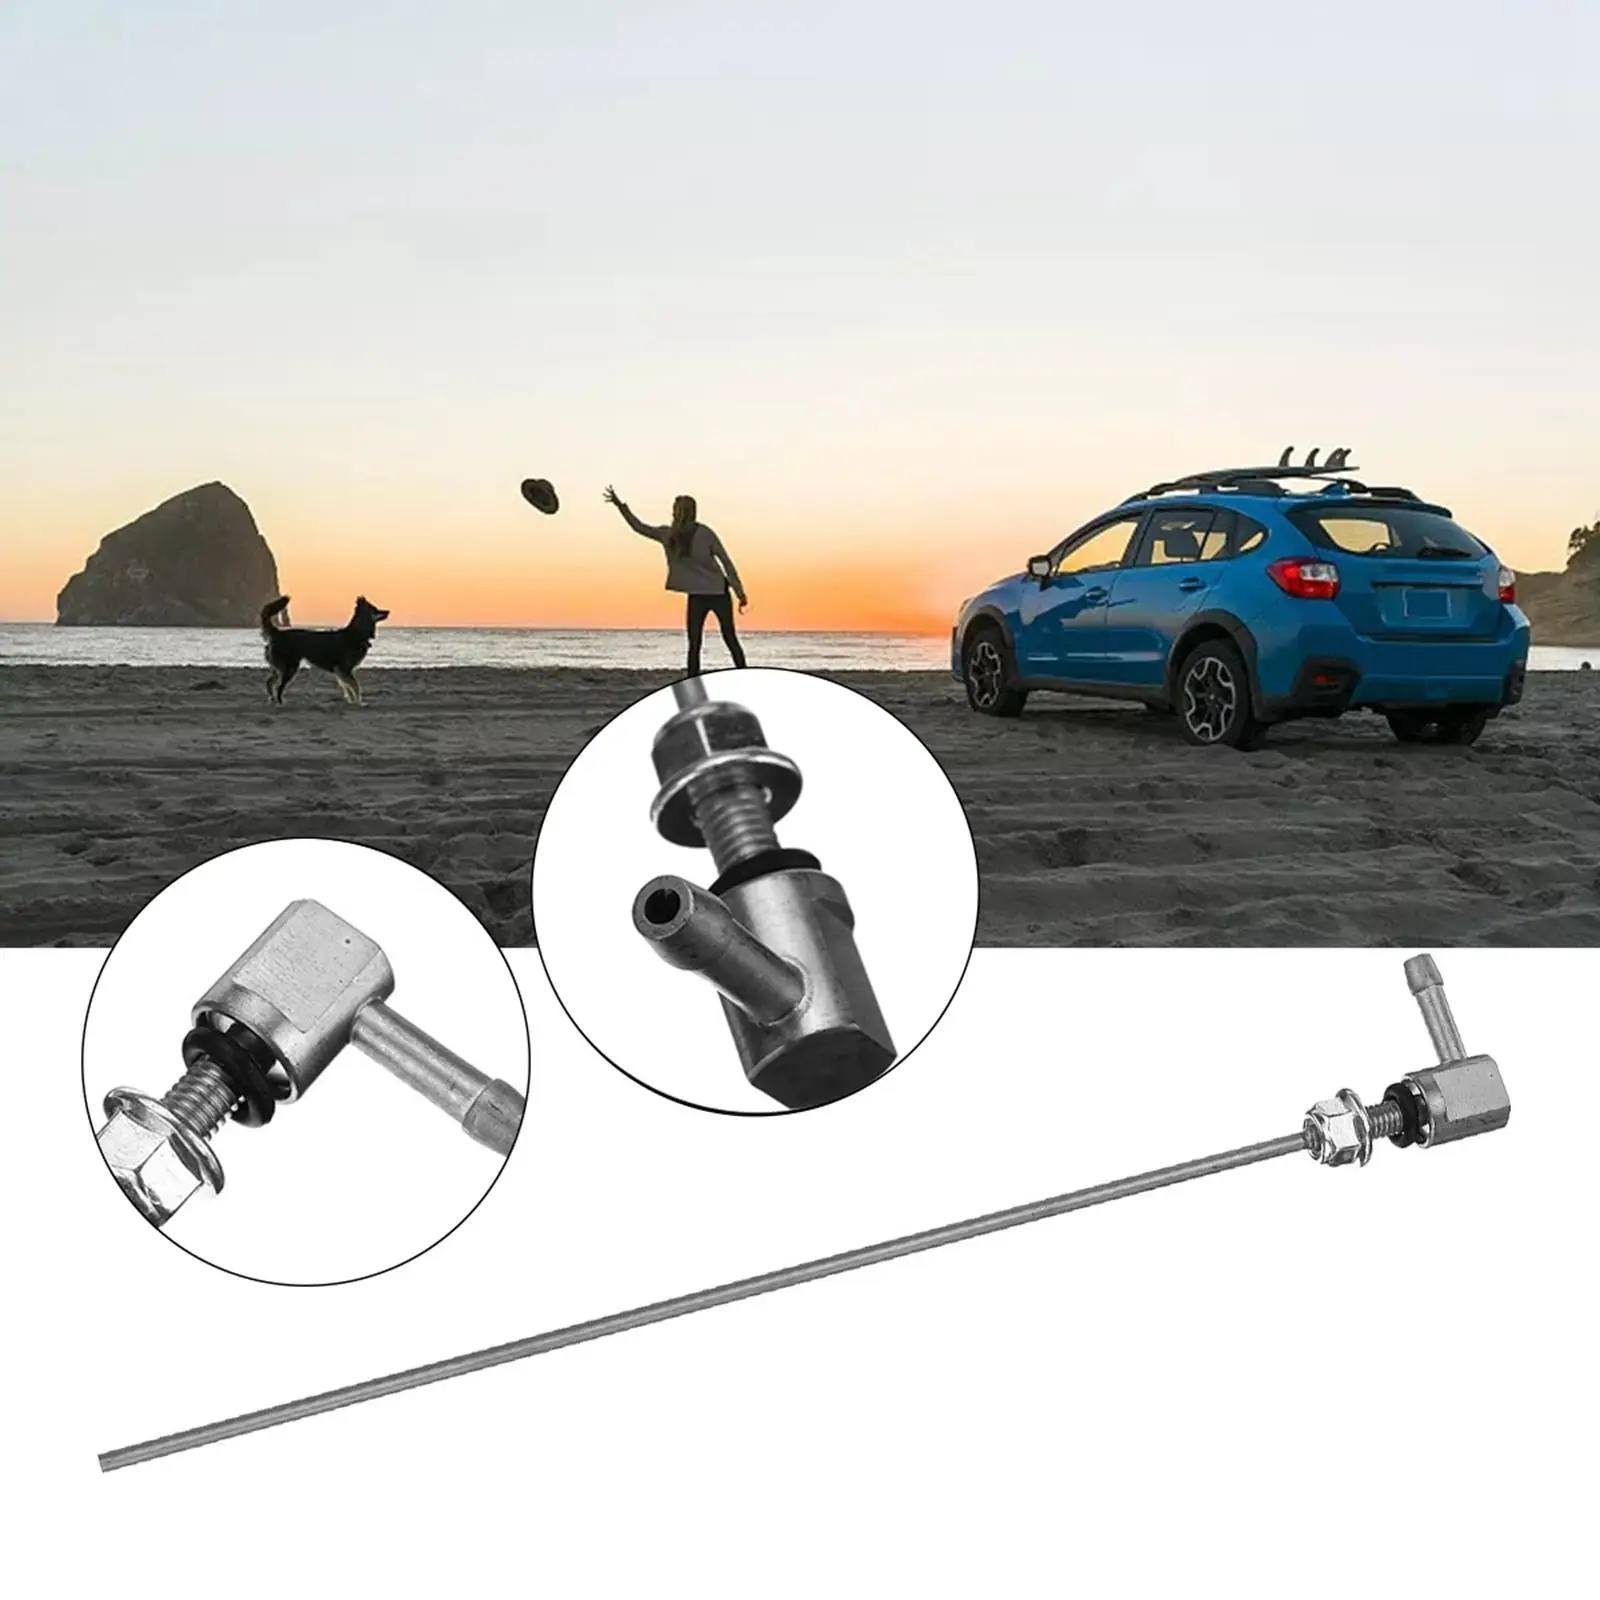 Car Parking Fuel Tank Standpipe Hose Clamp Accessories for 